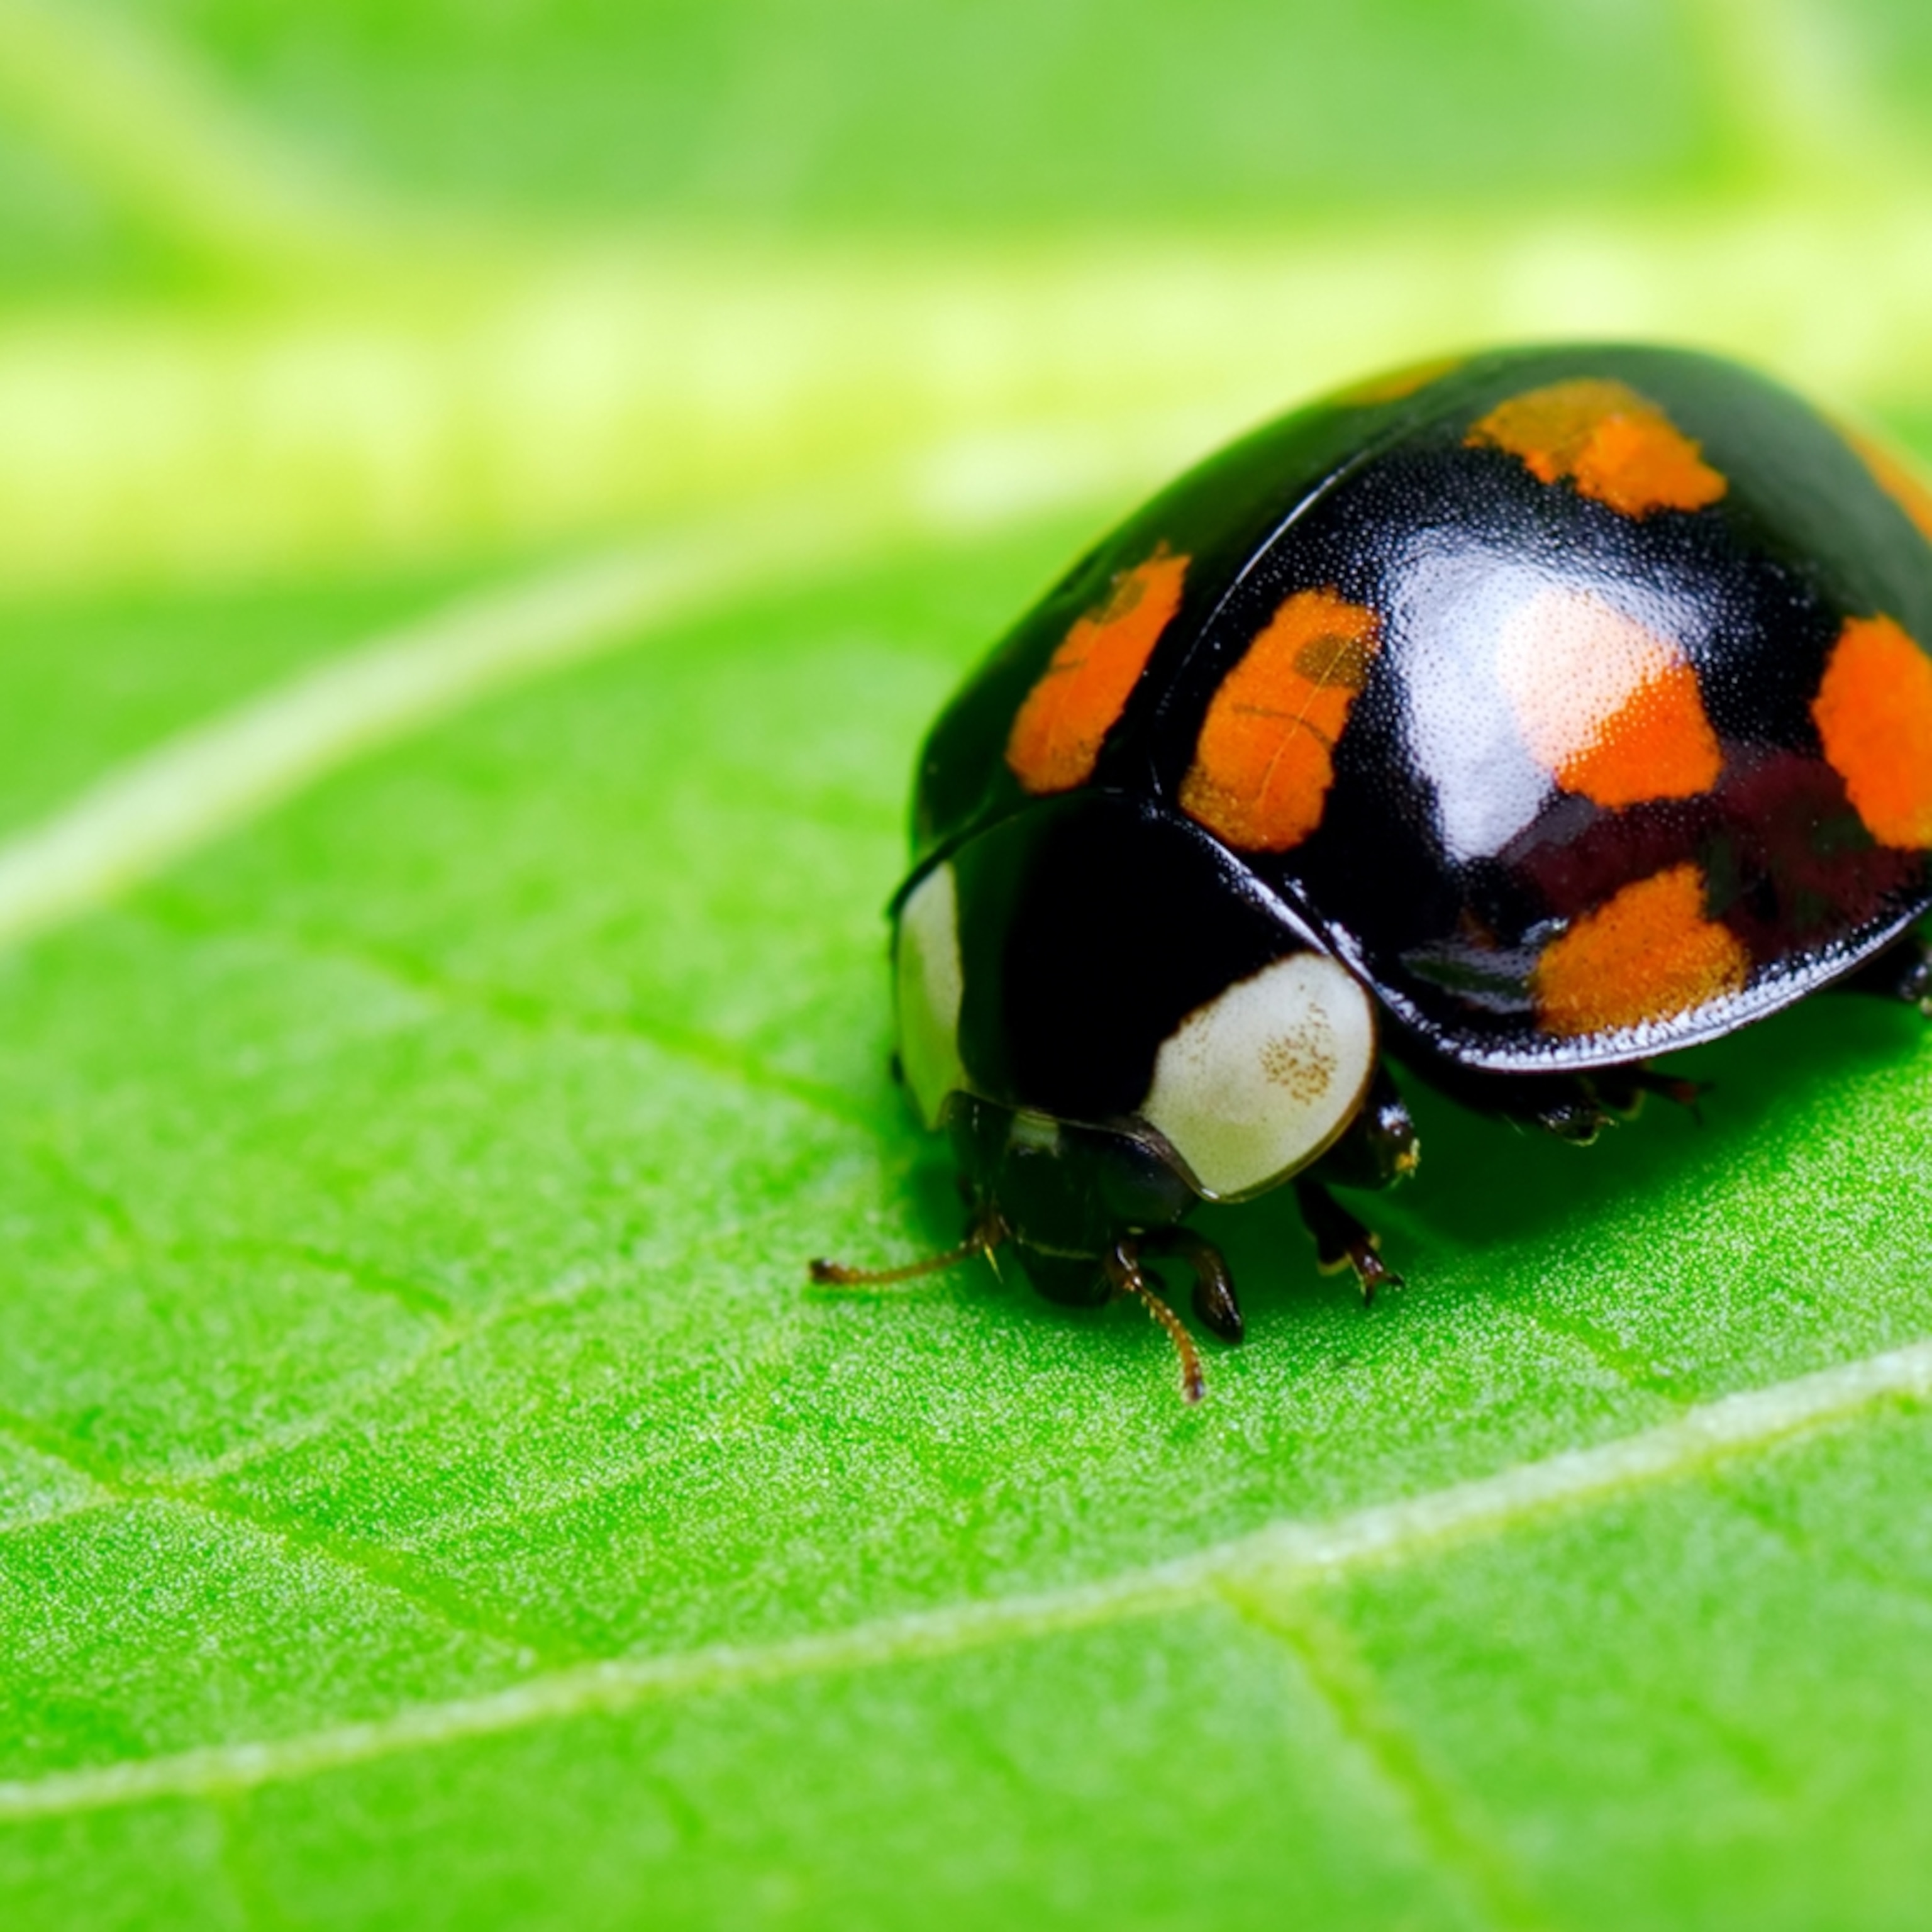 Why are ladybugs so popular?